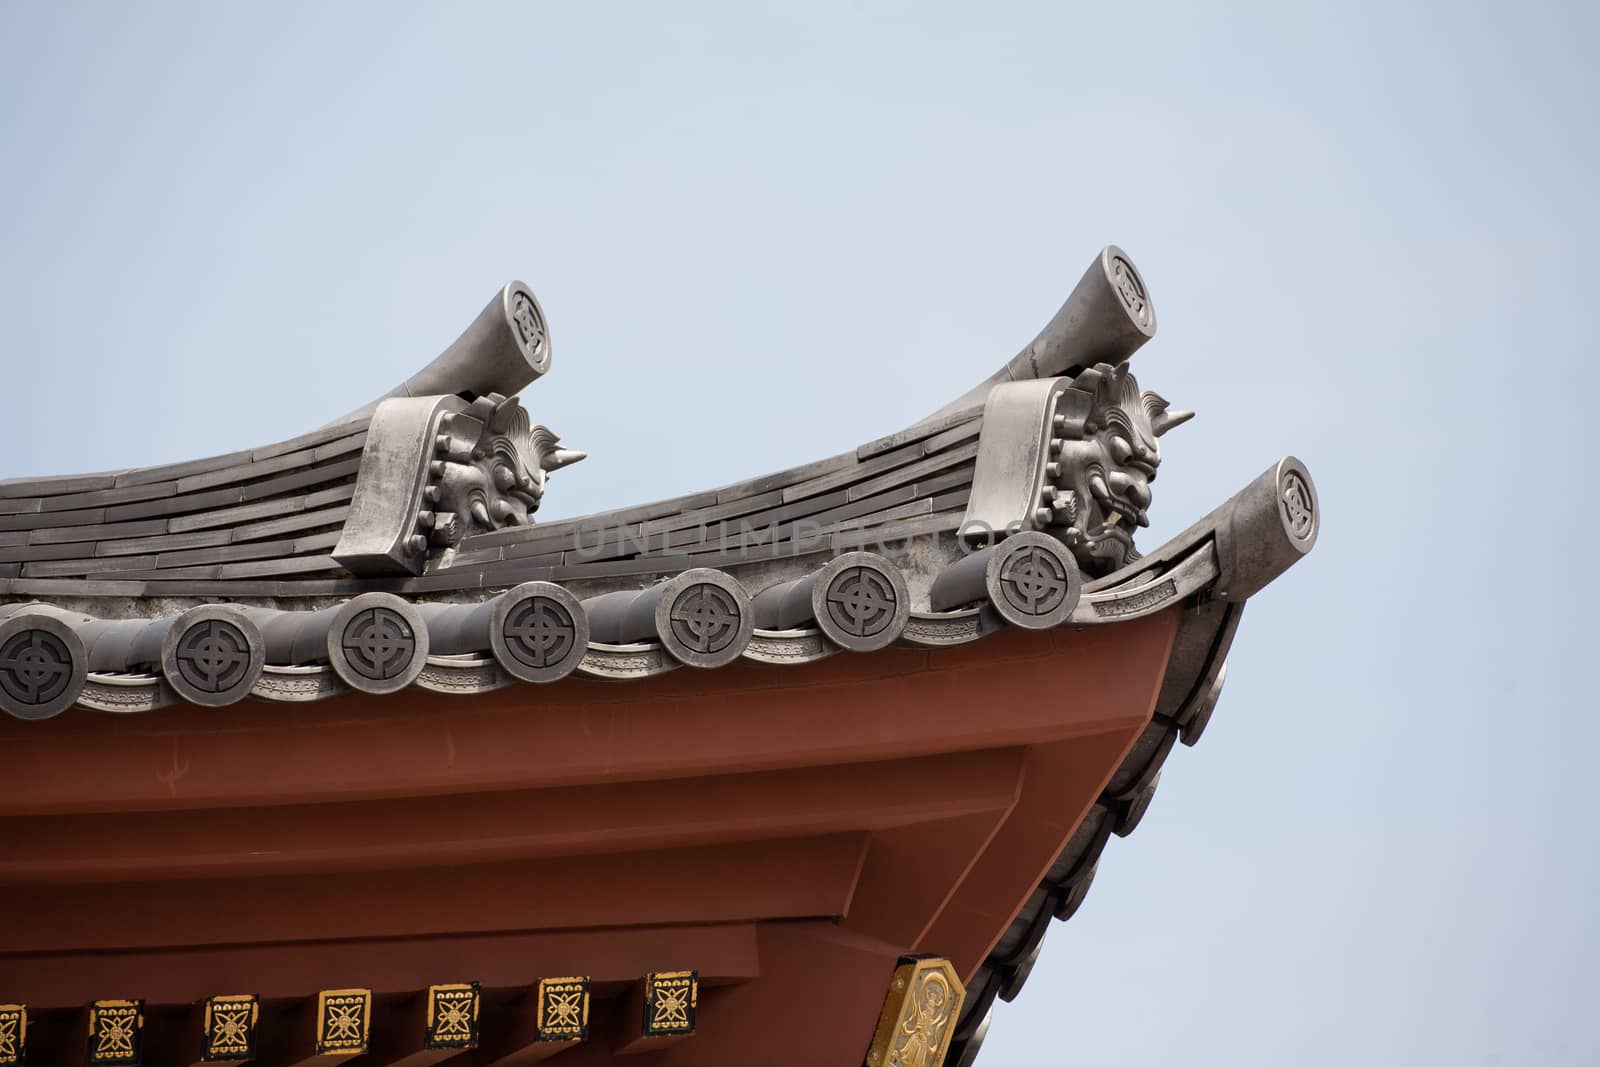 Detail on japanese temple roof against blue sky.